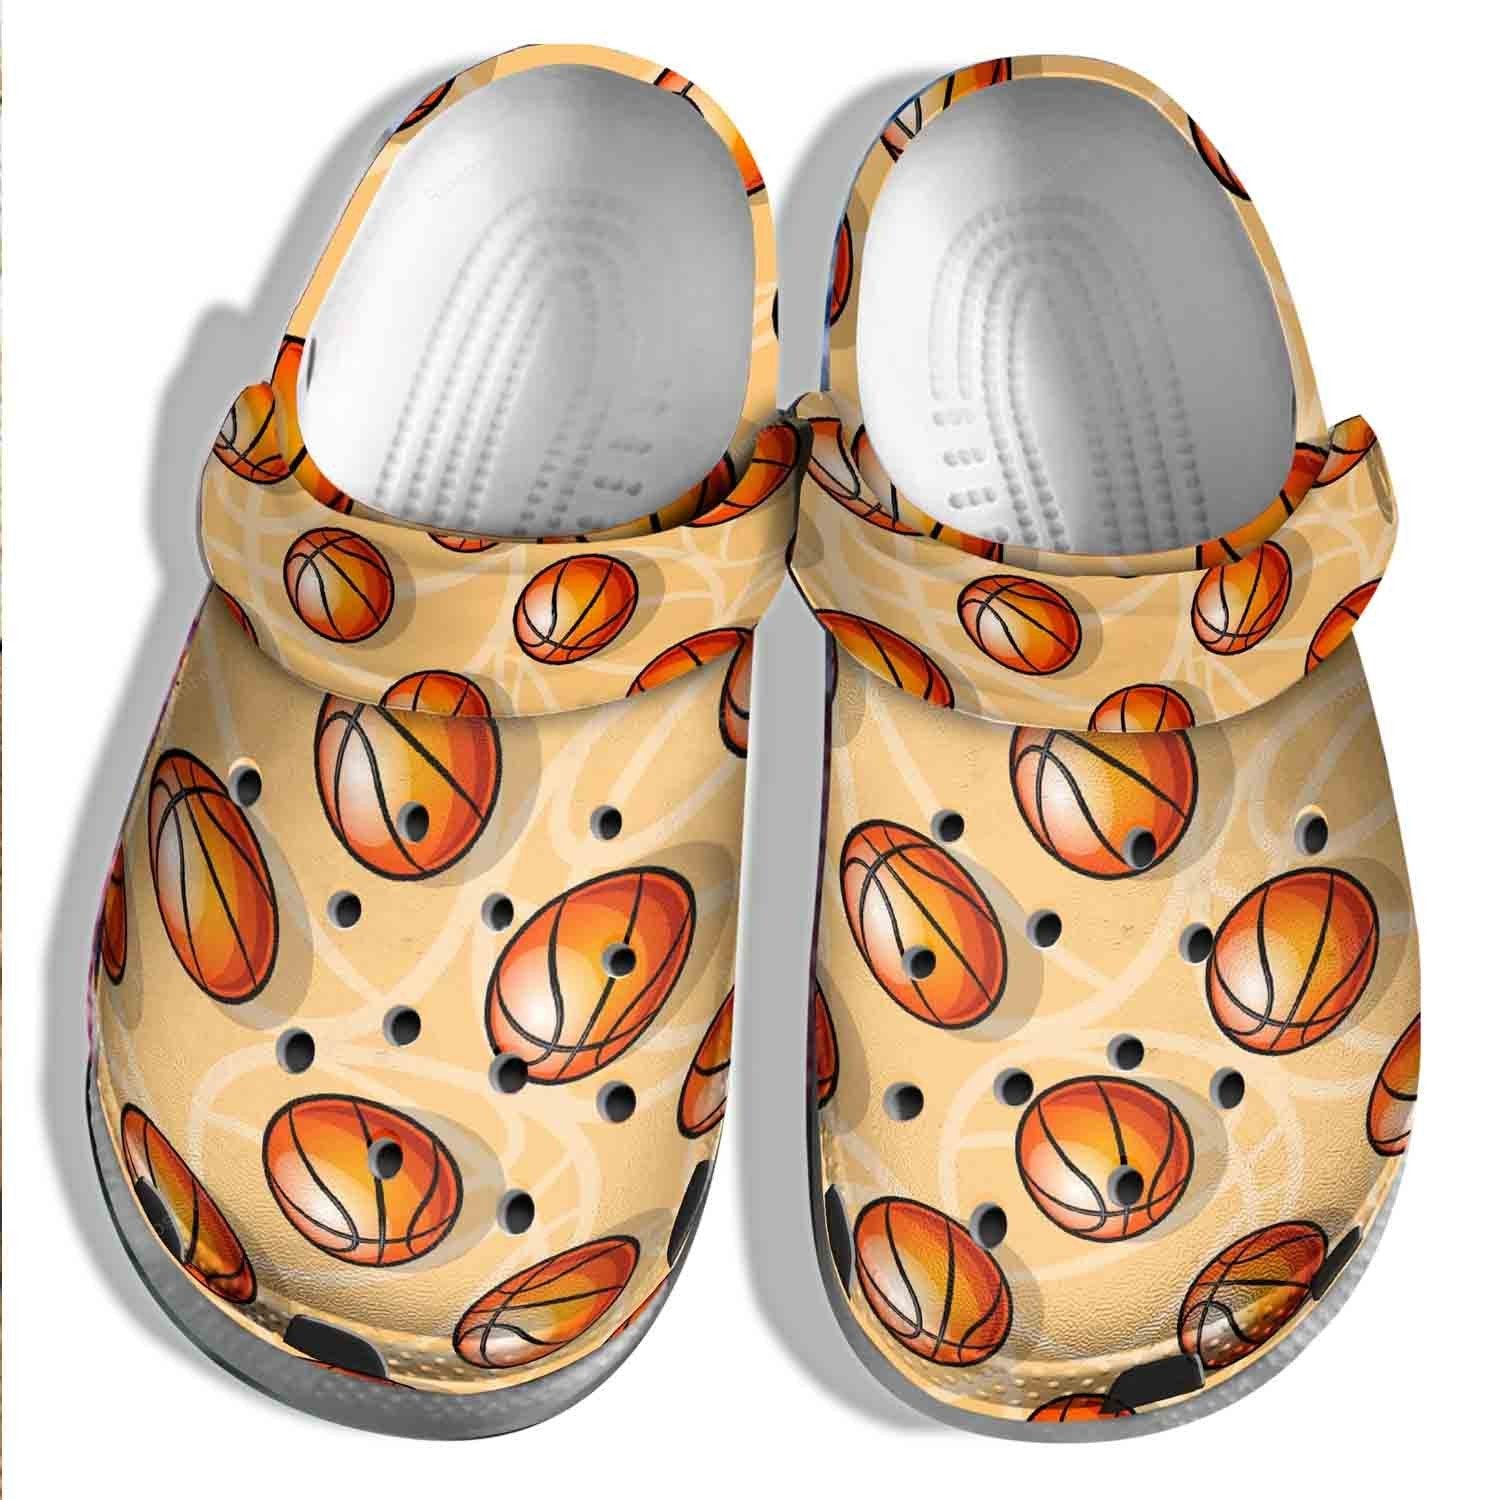 Basketball Funny Ball Crocss Shoes Clogs – Orange Basketball Outdoor Crocss Shoes Clogs For Men Women